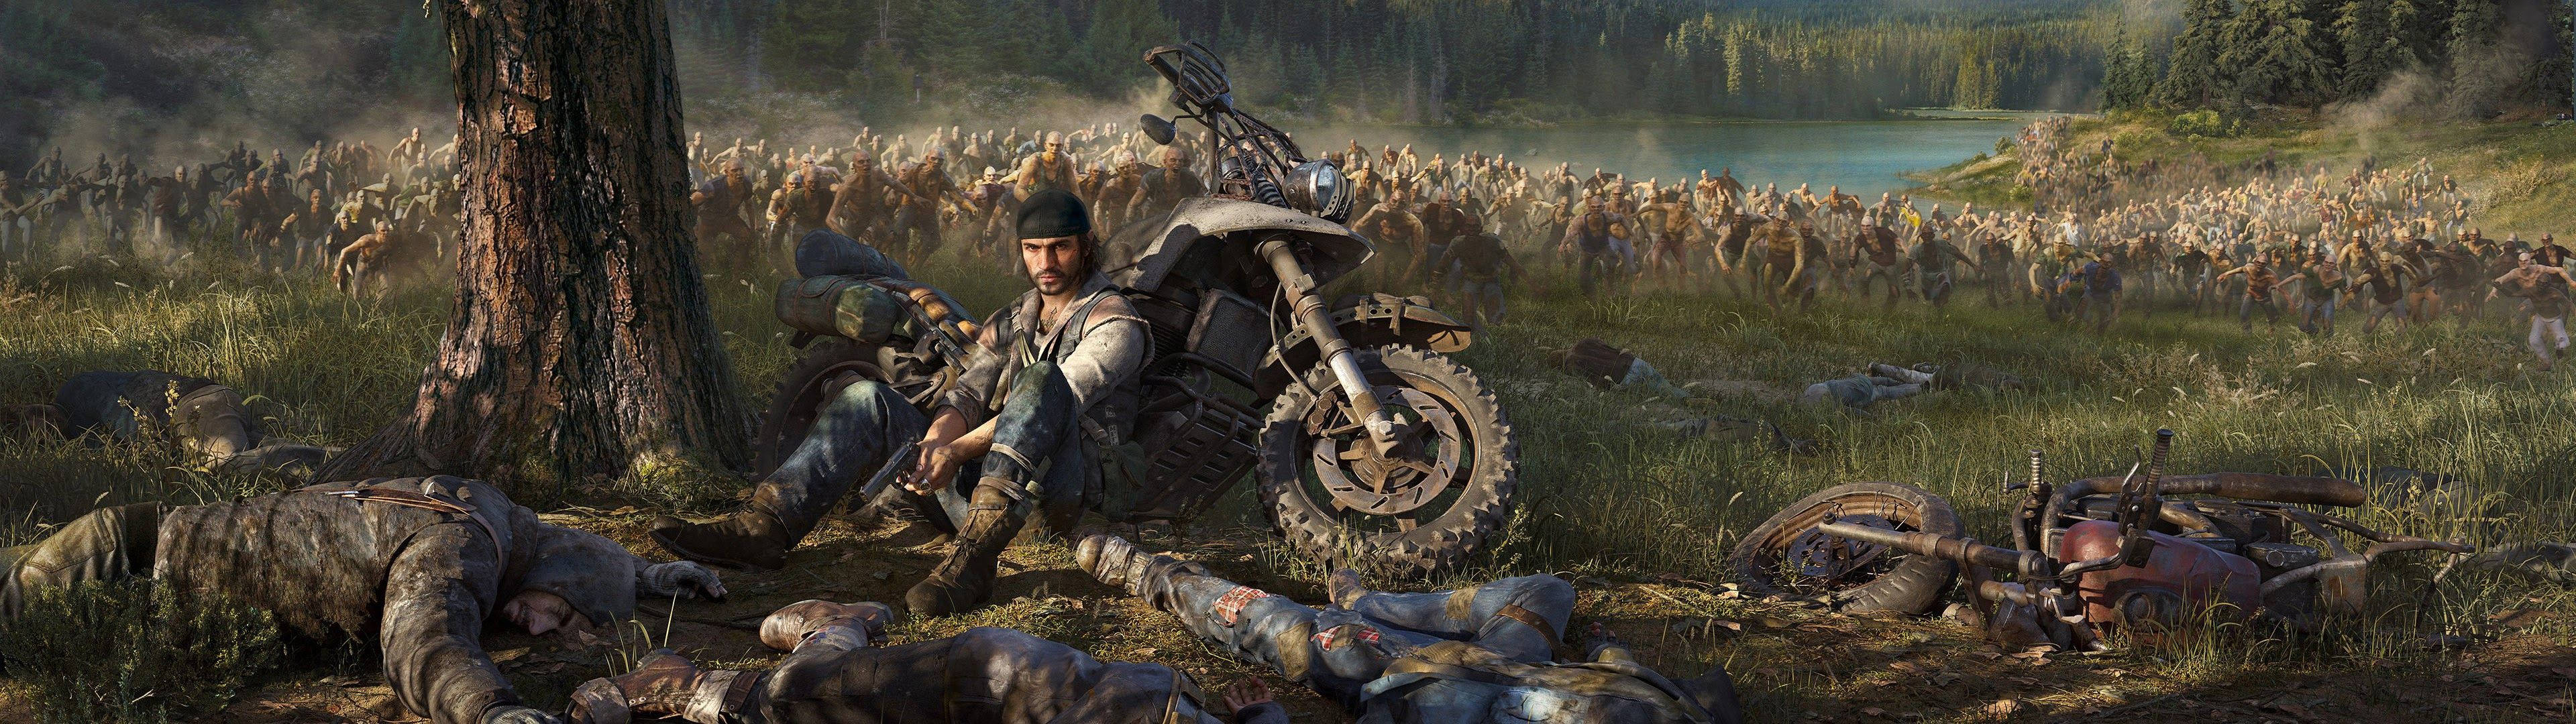 Survive a Zombie-infested Wasteland in Days Gone Wallpaper